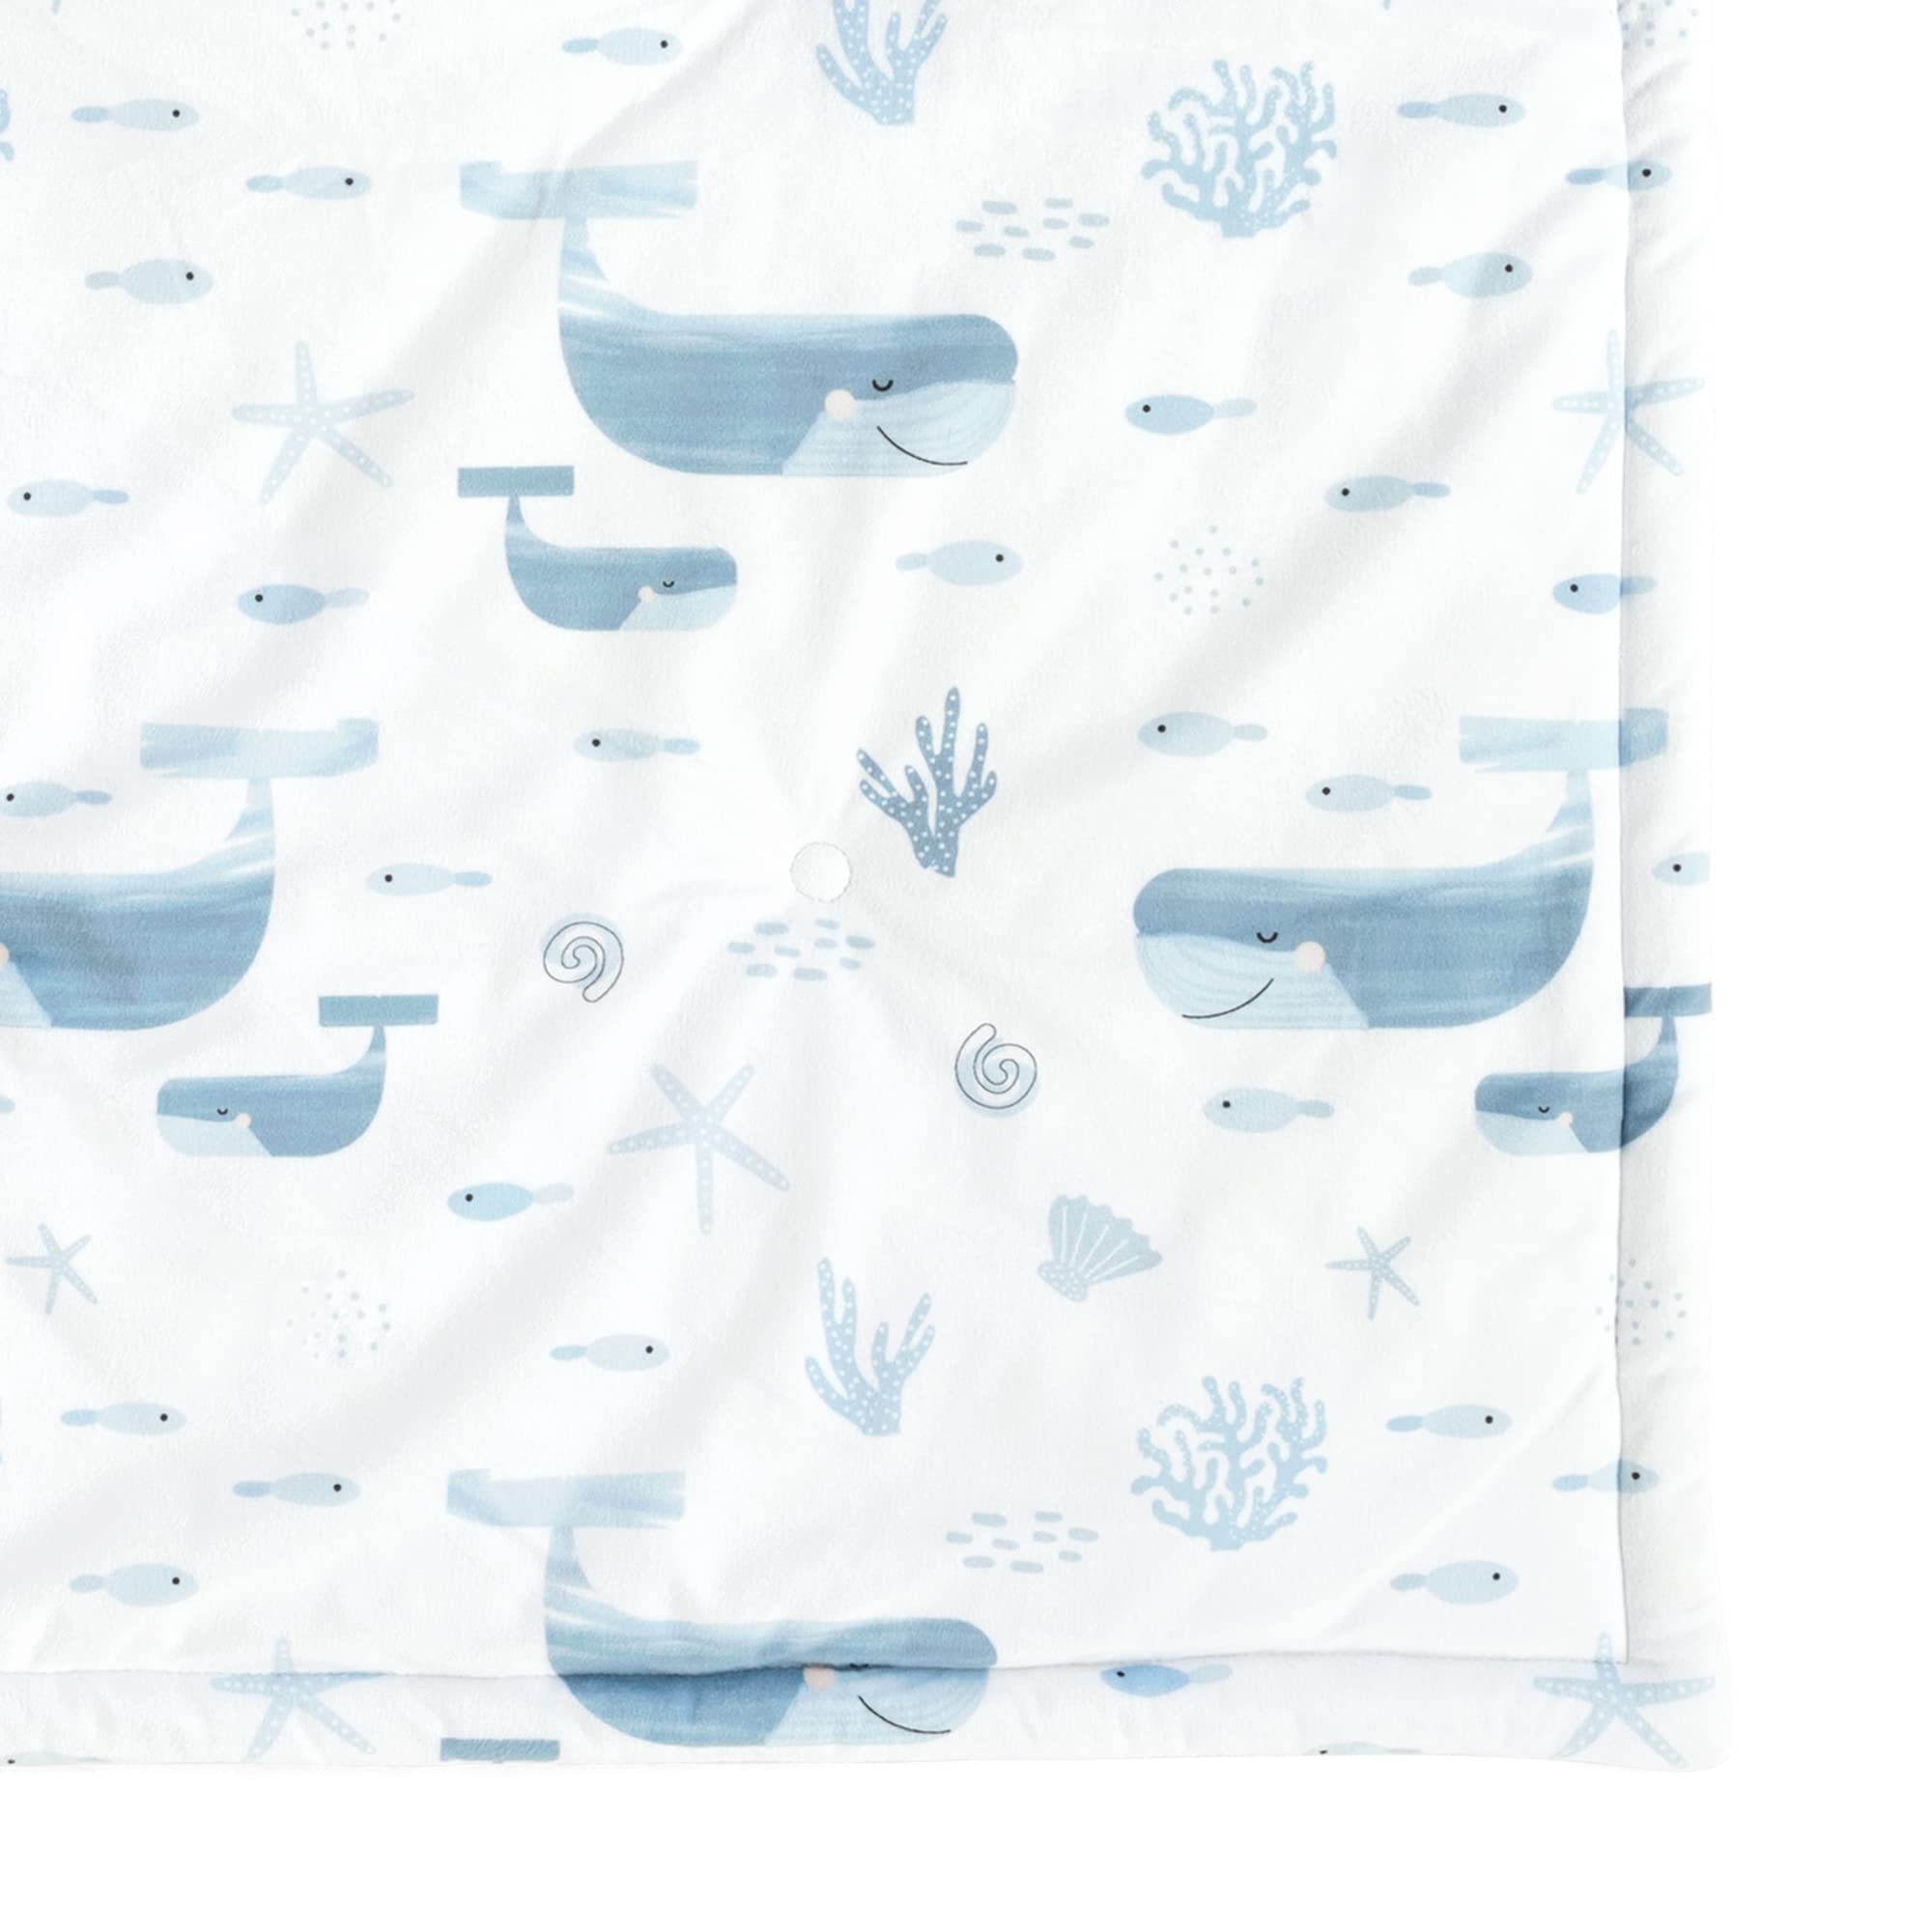 Lush Decor Seaside Baby Square with Border Play Mat, 35